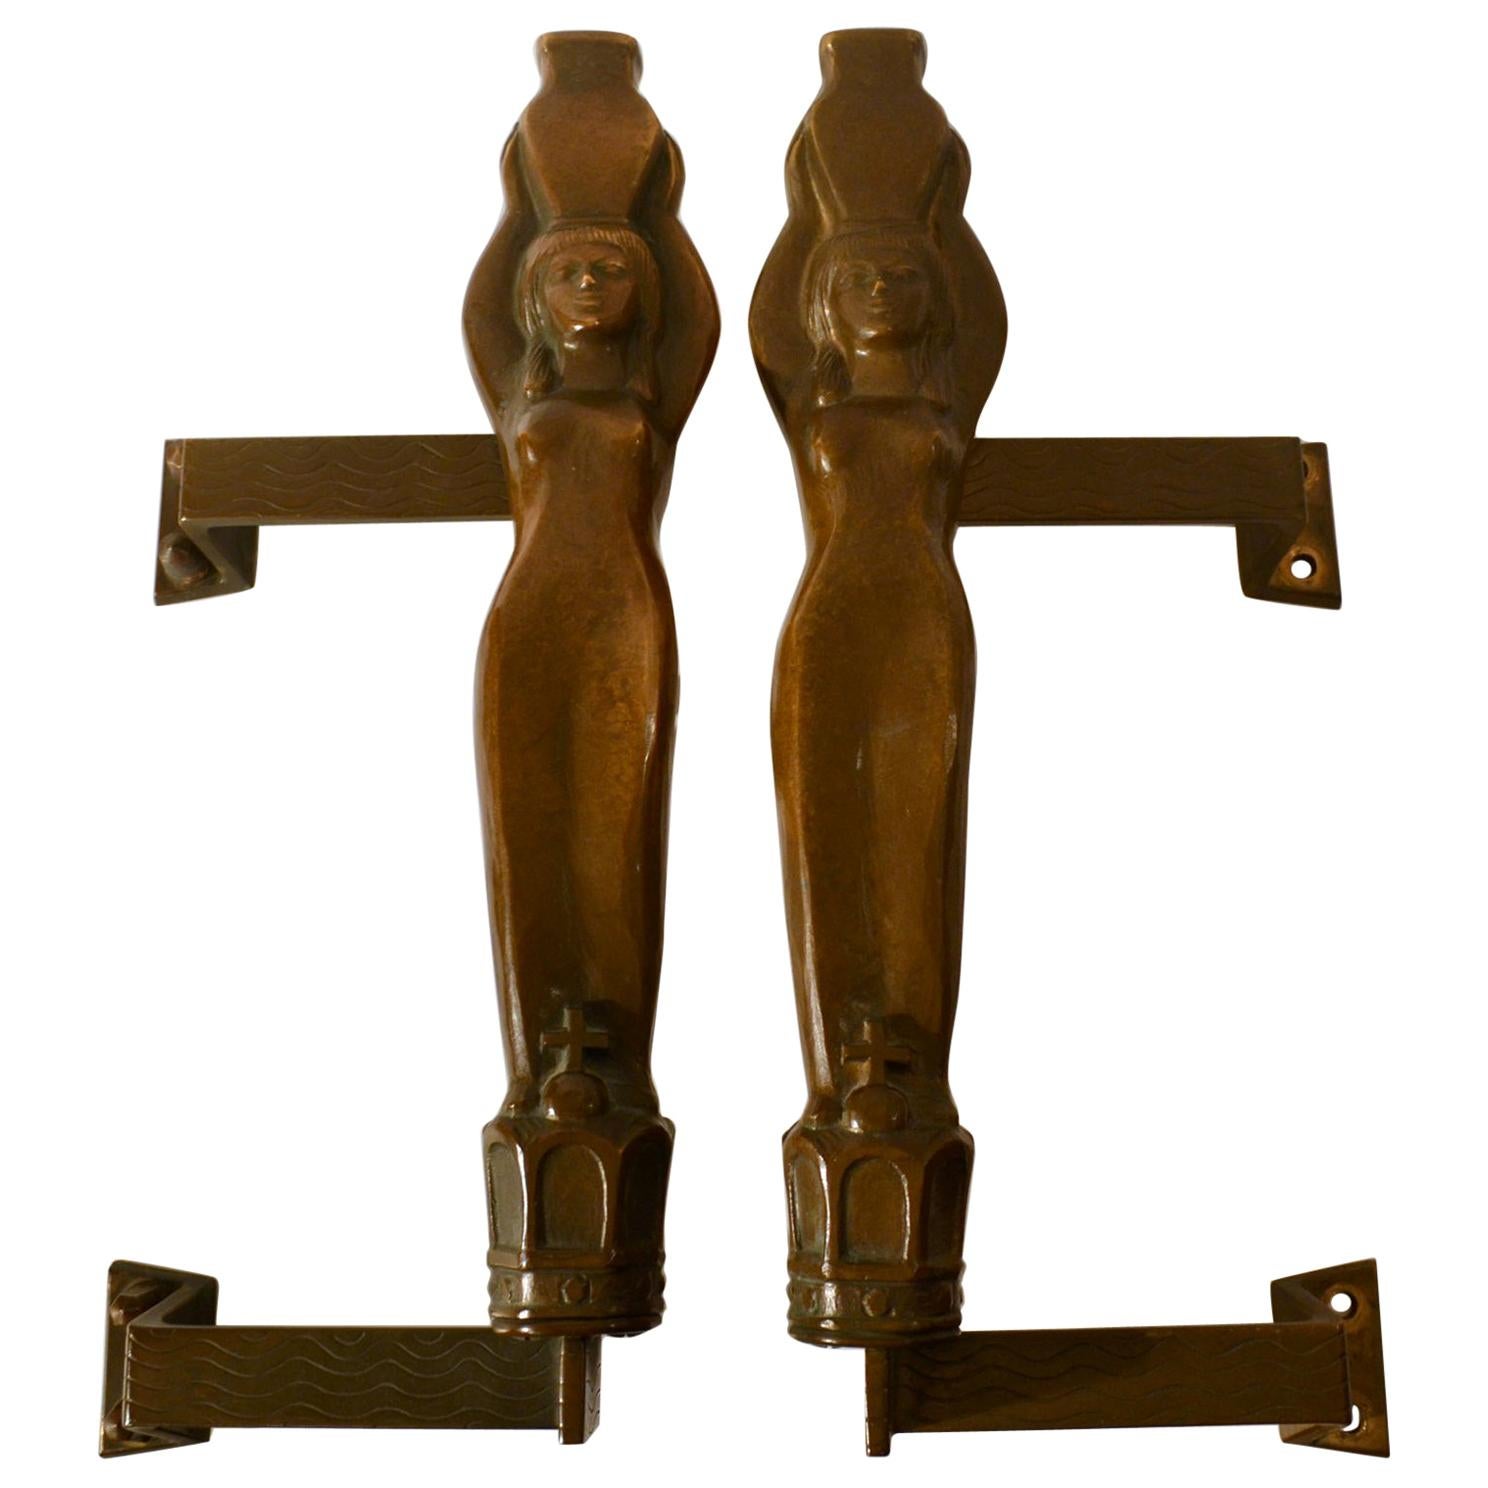 Pair of Large Art Nouveau Bronze Push and Pull Door Handles with Water Nymphes